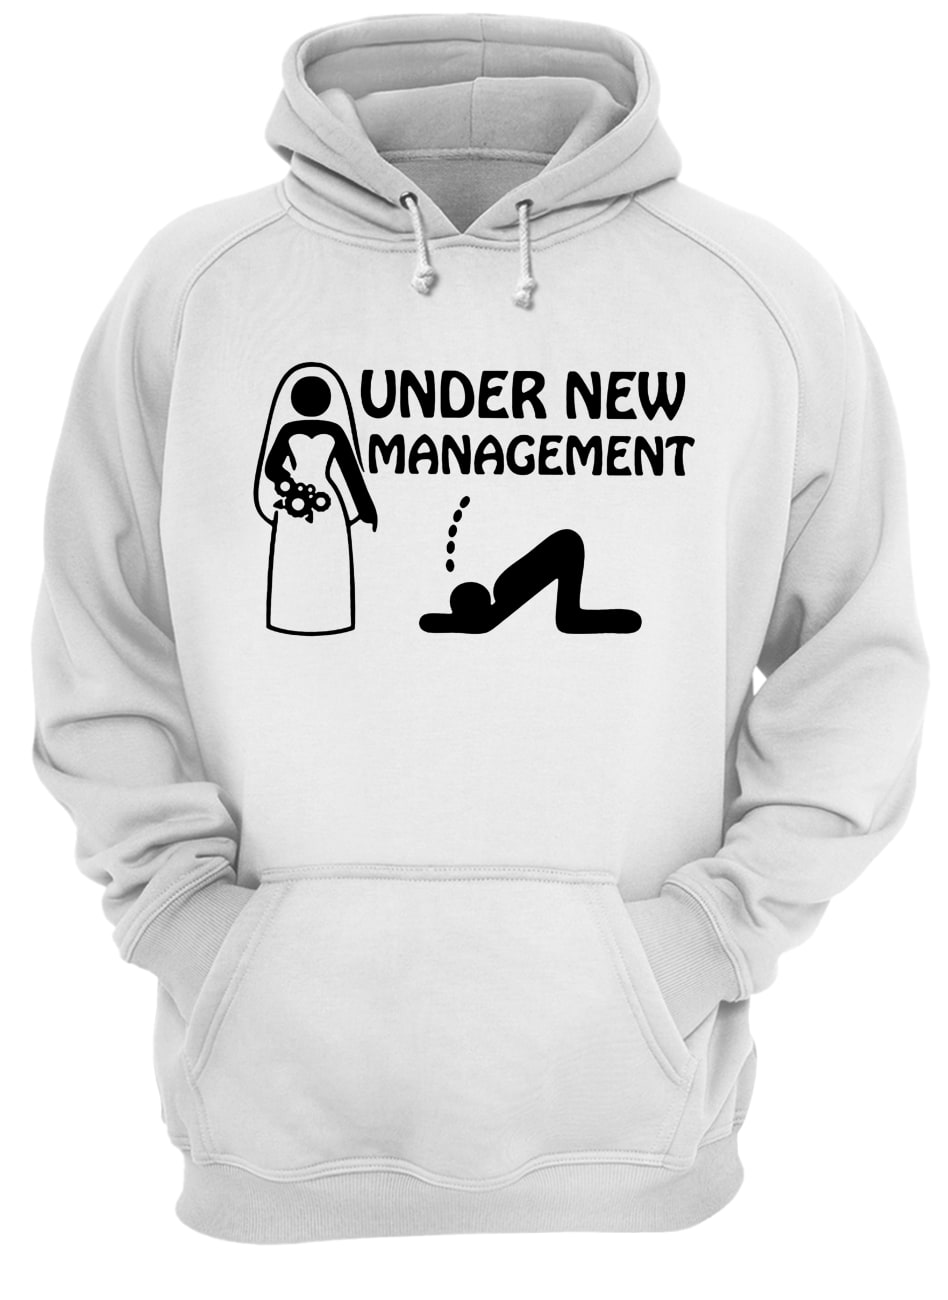 Bachelor party under new management hoodie